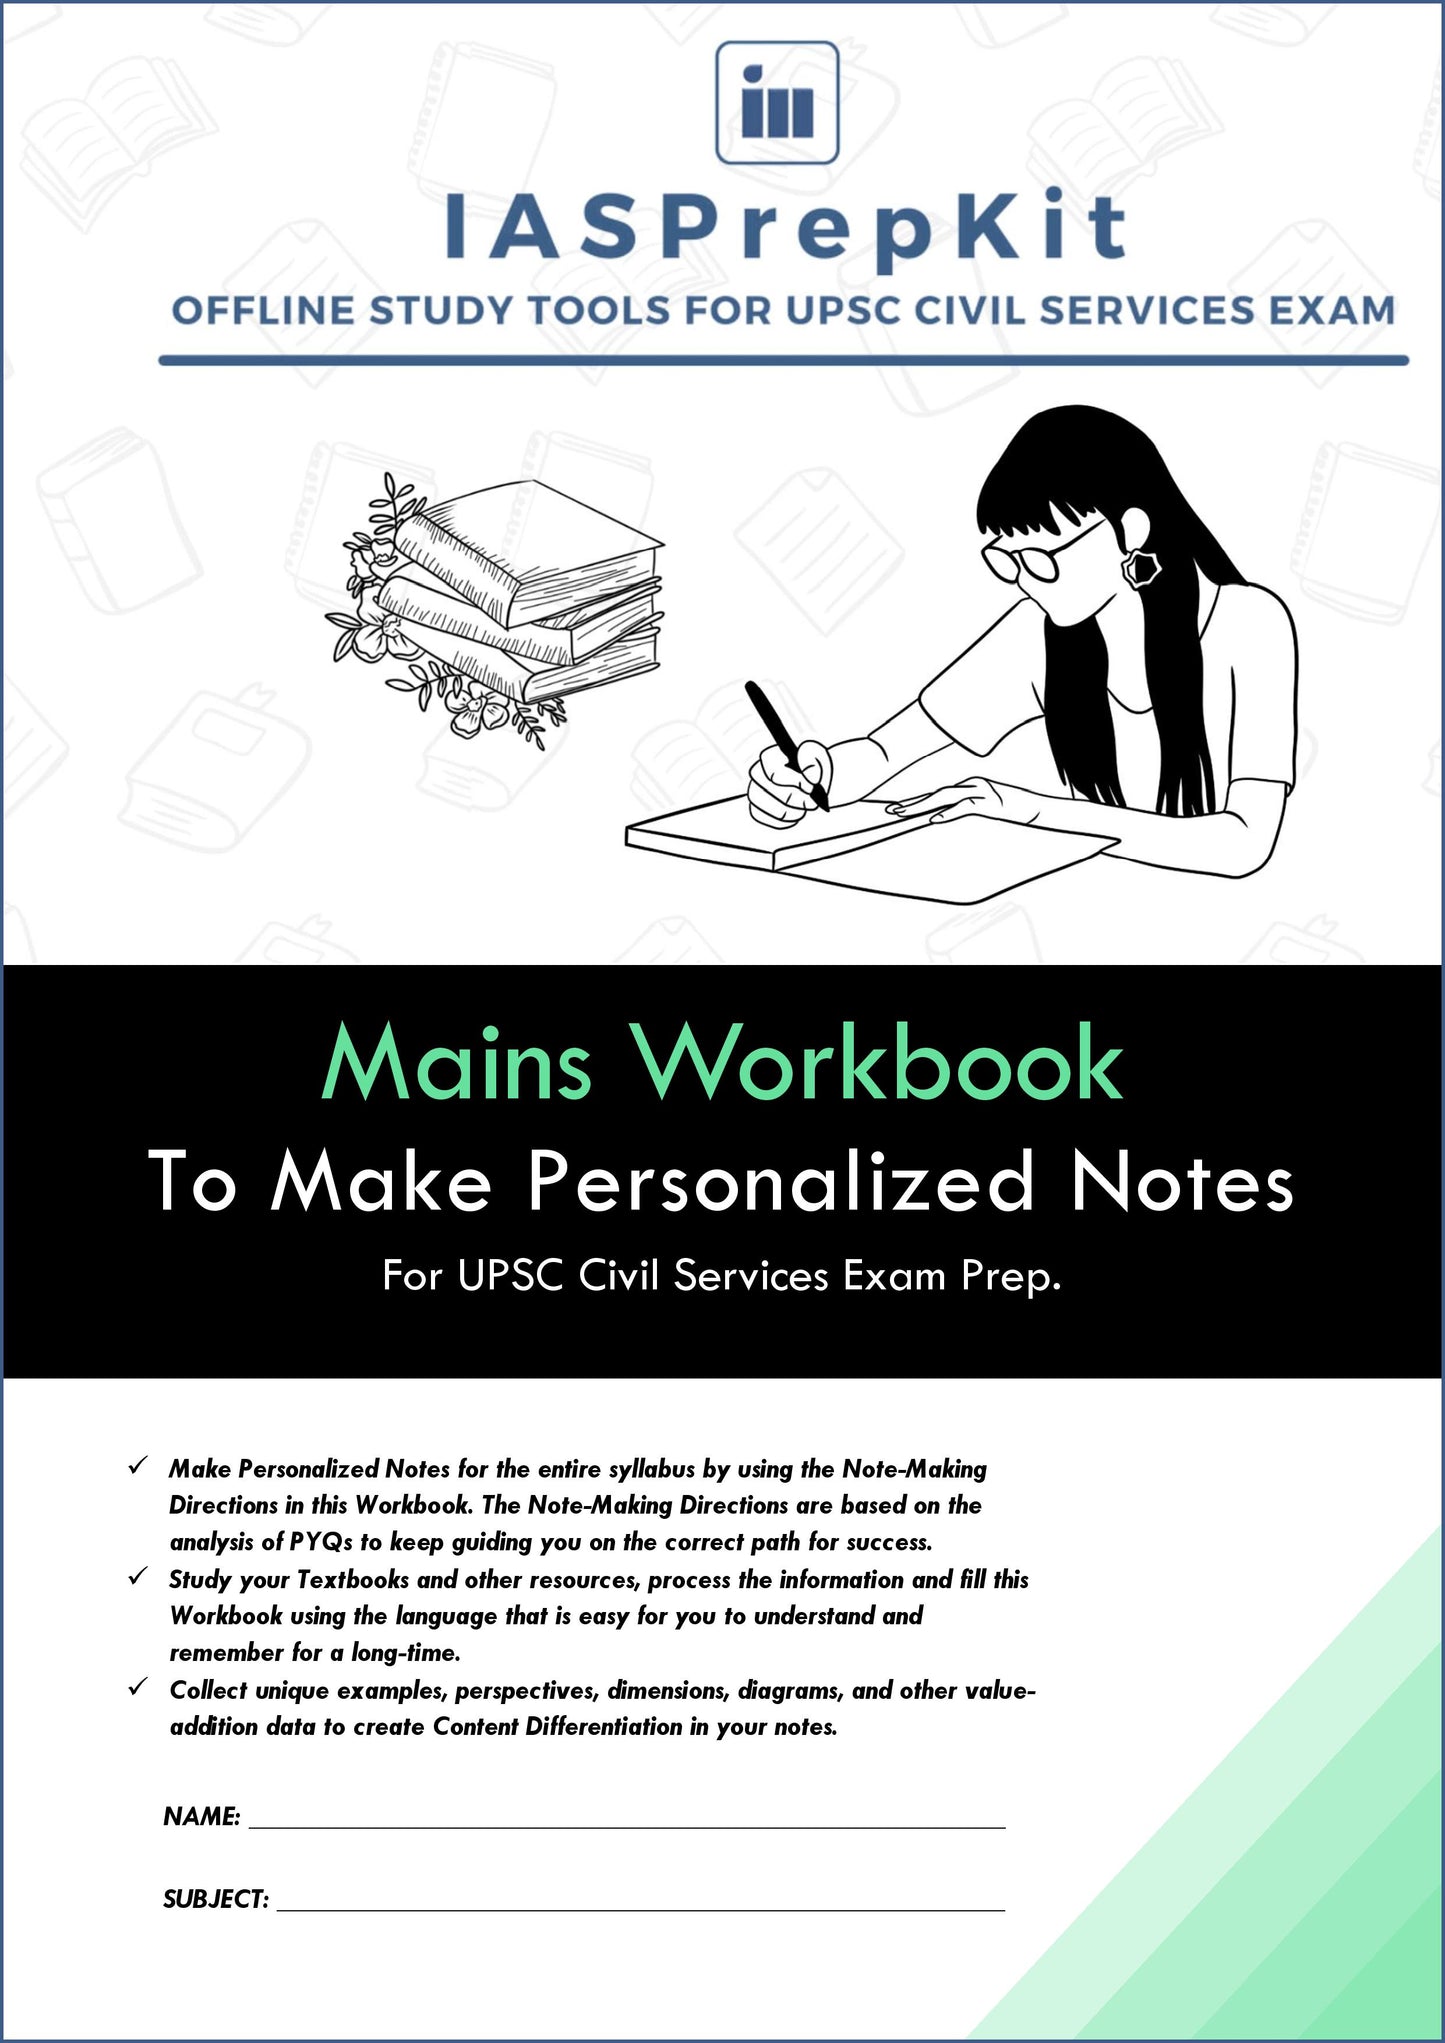 Art & Culture (GS 1) - Mains Workbook to Make Personalized Notes for UPSC Civil Services Exam